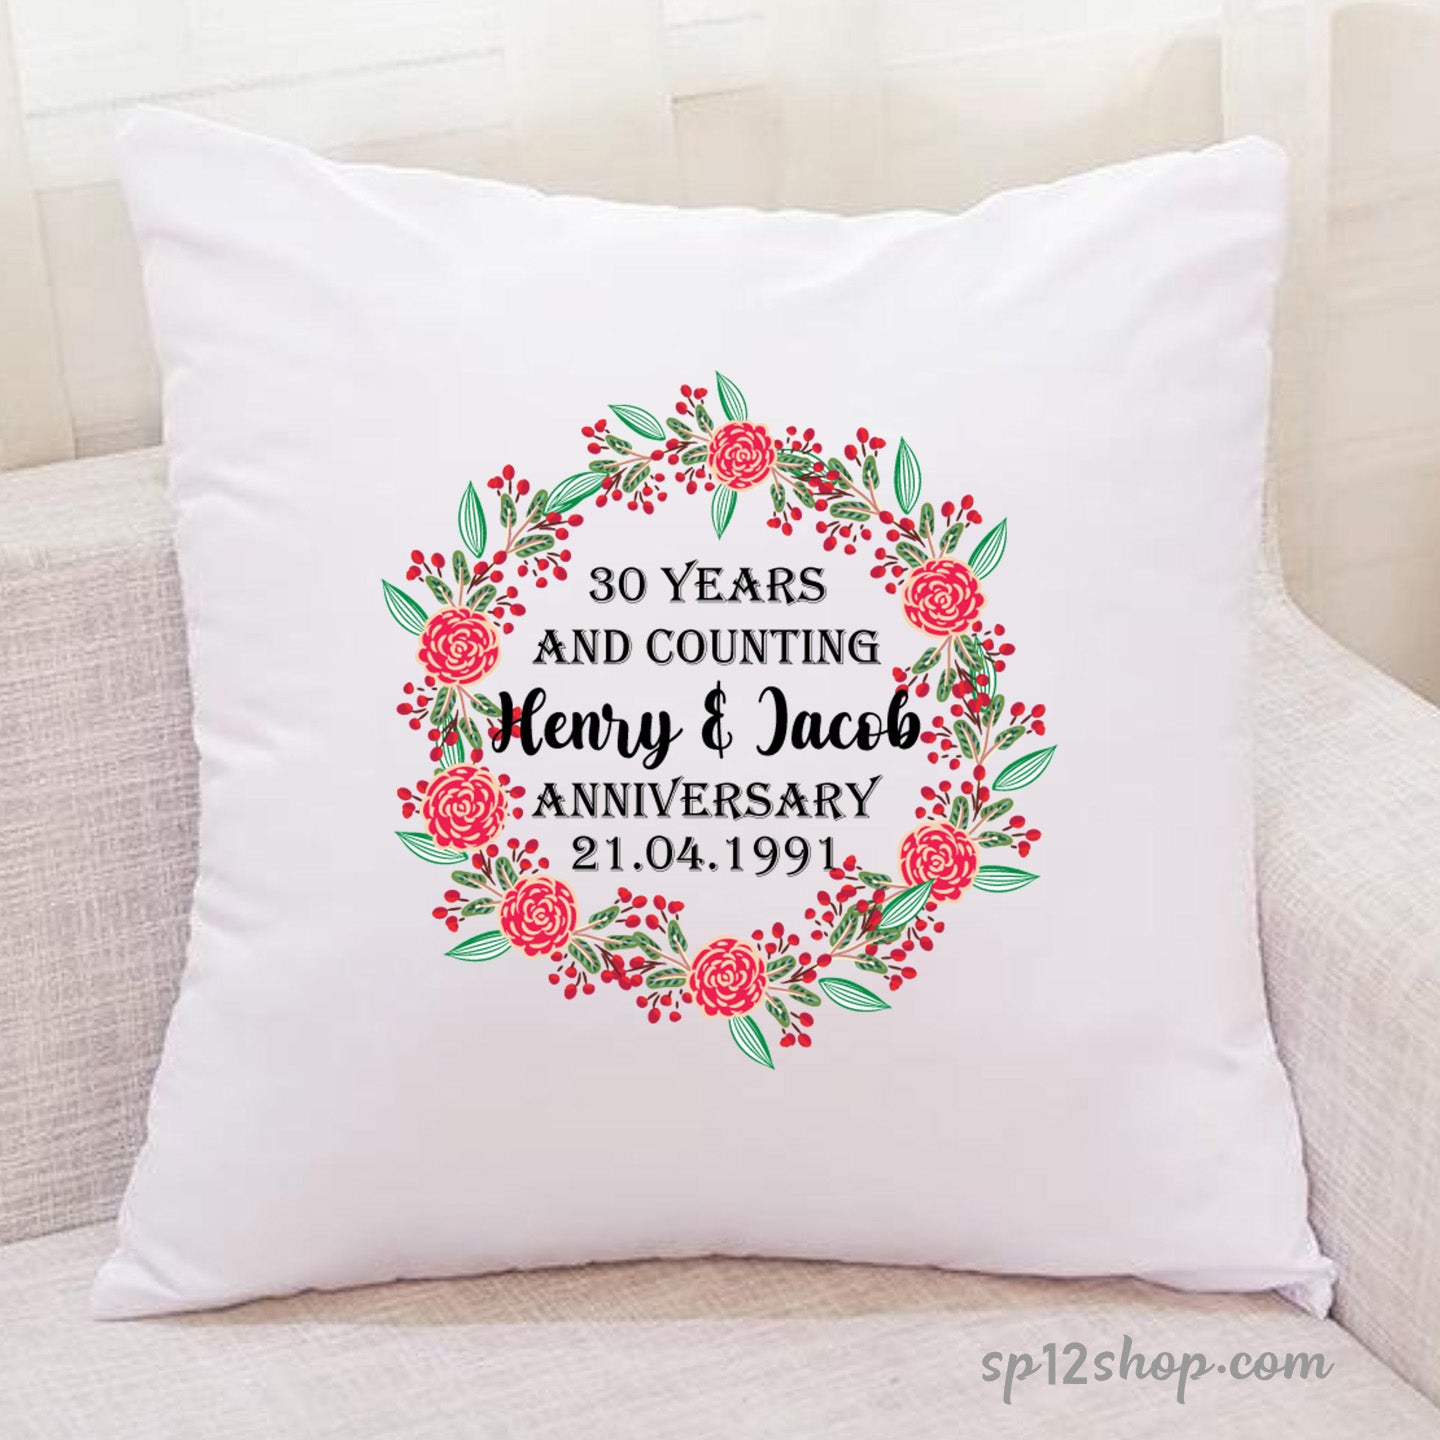 Custom Anniversary With Couple Name Cushion Cover